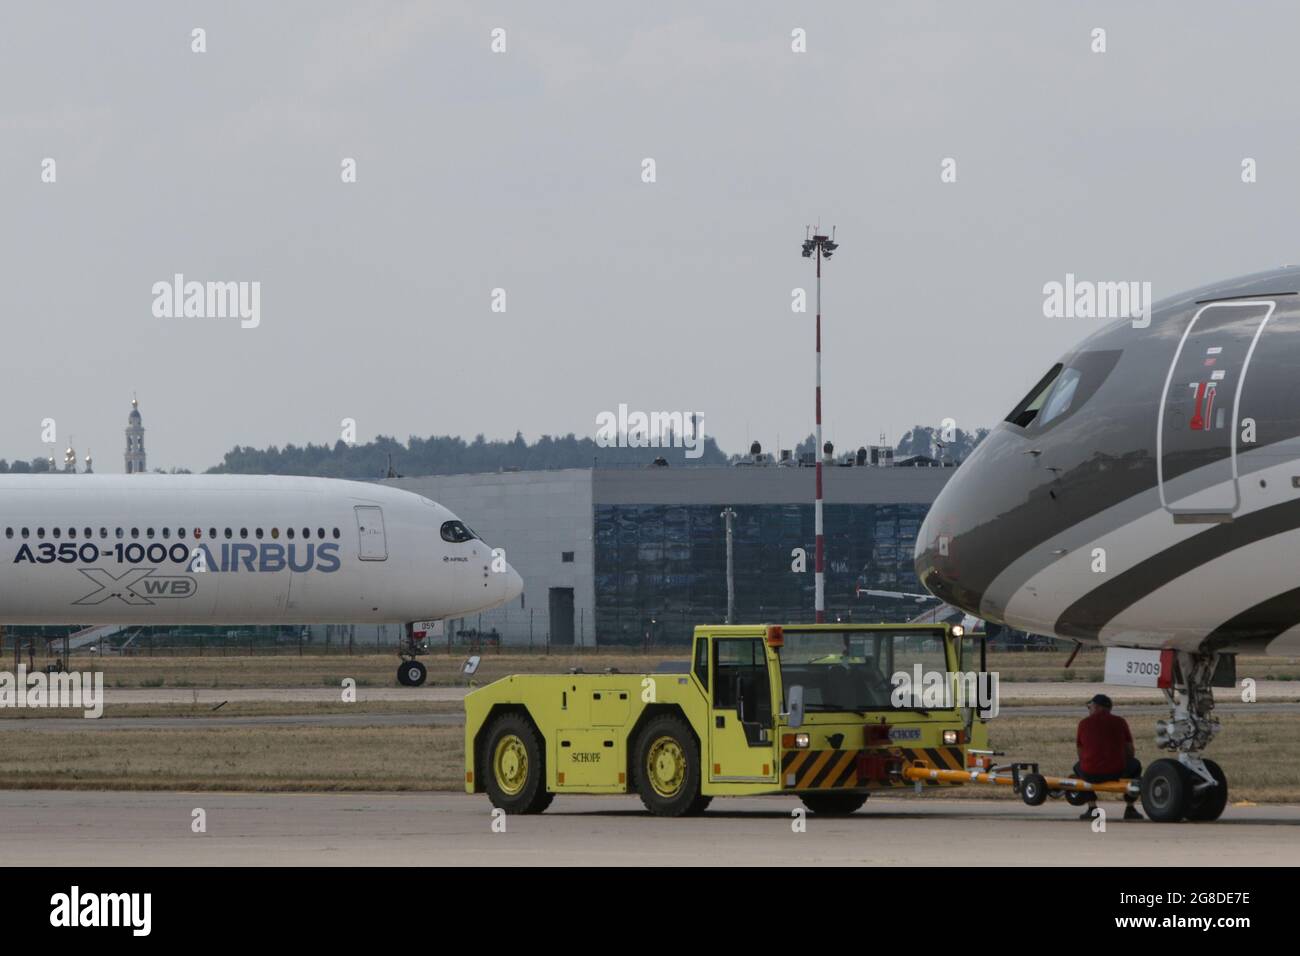 Moscow, Russia. 18th July, 2021. Airbus A350-1000 airliner arrives two days prior the official opening of MAKS-2021 Moscow International Airshow near Zhukovsky, South-East of Moscow, Russia.MAKS (International Air and Space Salon) is a biennial international air show held at Zhukovsky International Airport, near Moscow. MAKS is a traditional marketplace for Russian defence and commercial aerospace industry. (Photo by Leonid Faerberg/SOPA Images/Sipa USA) Credit: Sipa USA/Alamy Live News Stock Photo